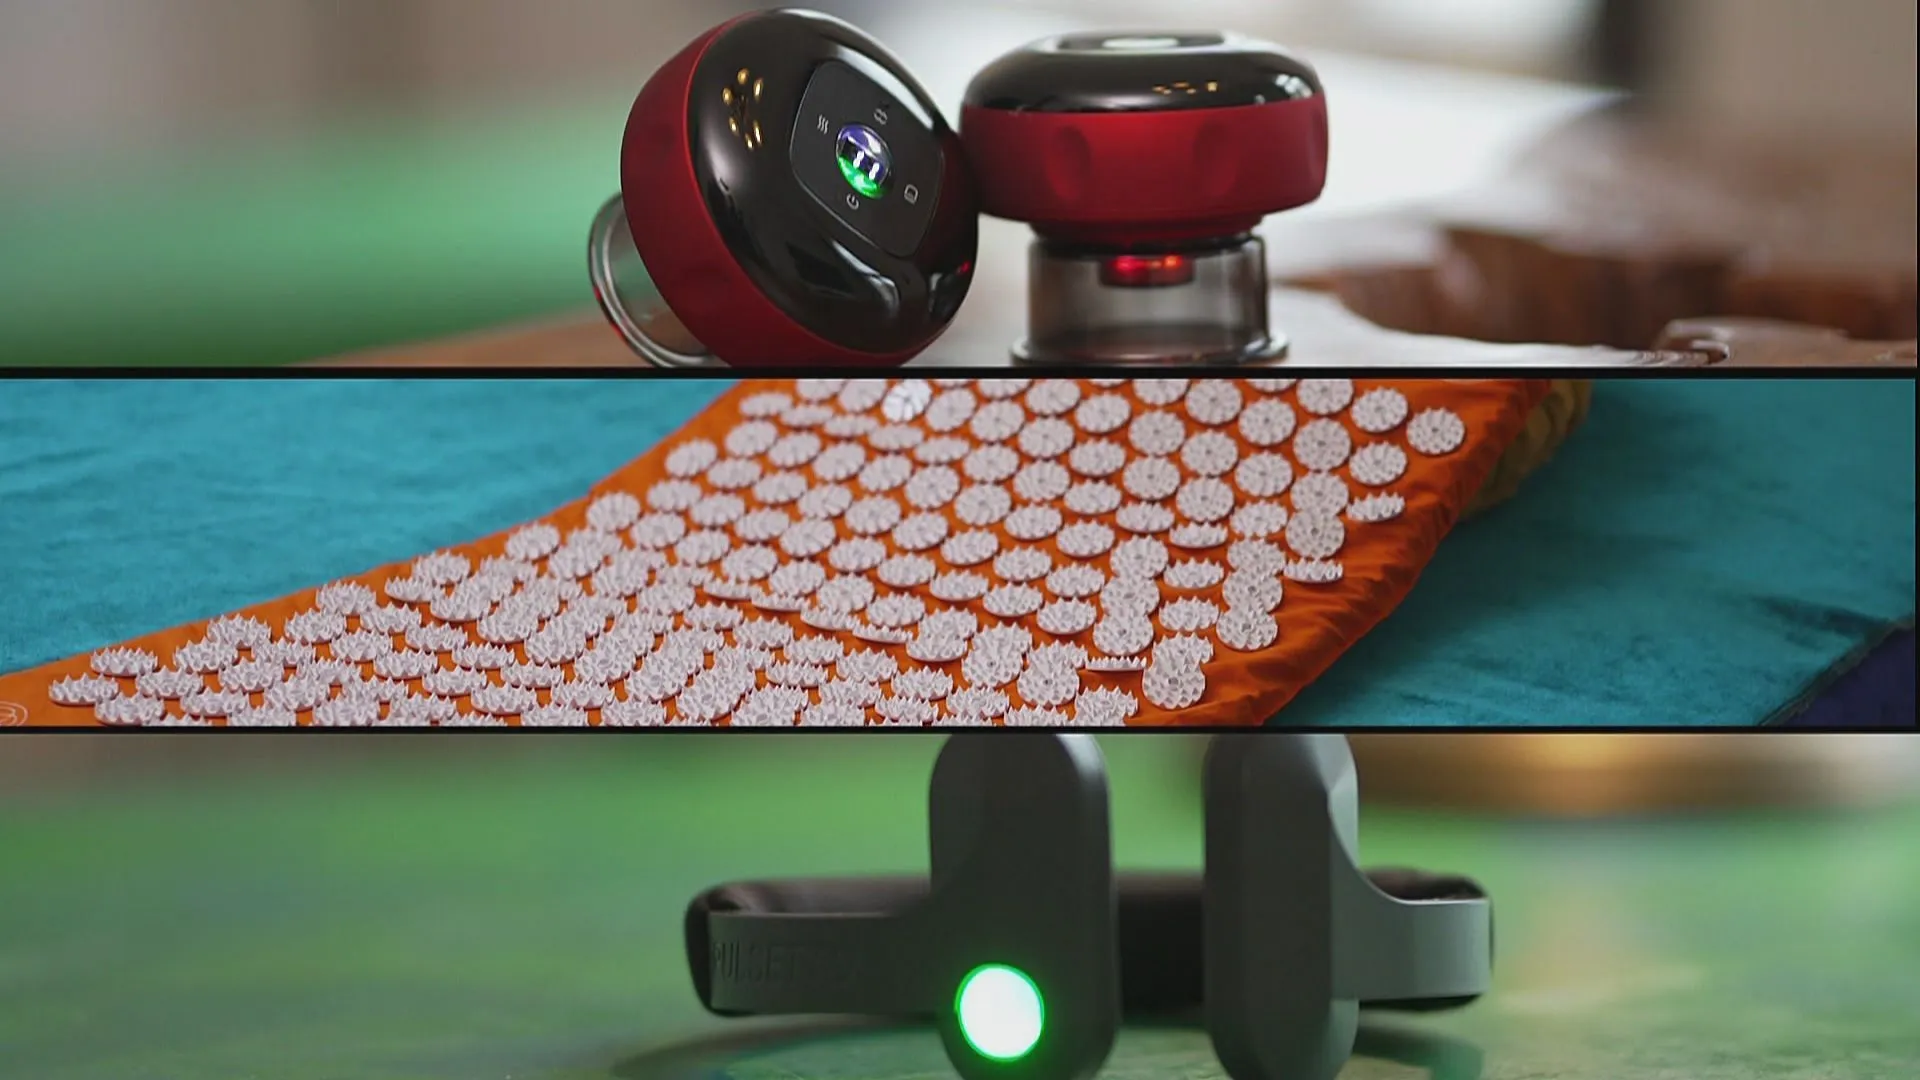 Massage and acupressure: can health gadgets relieve tension?